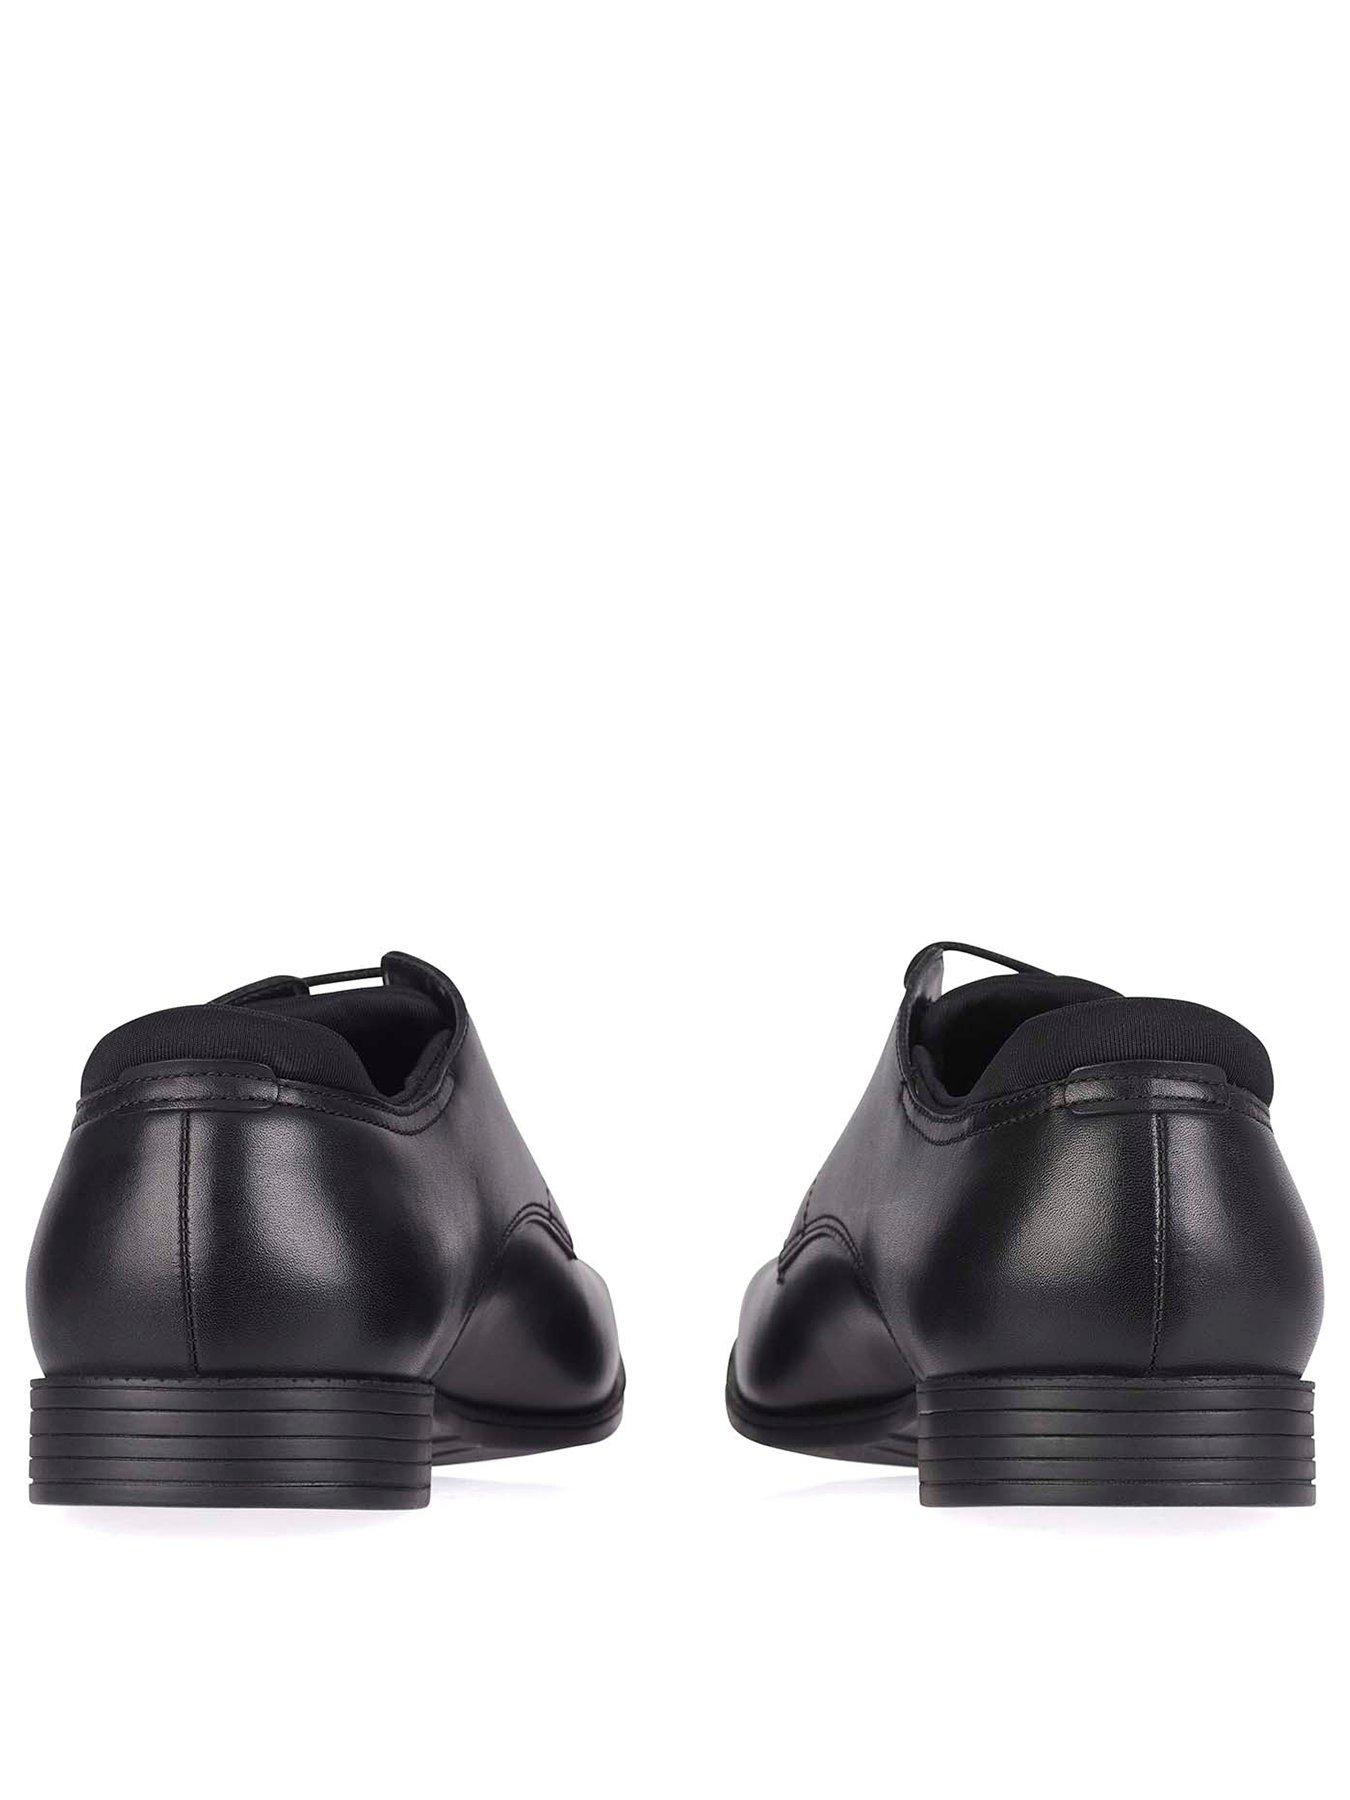  Academy Lace Up School Shoes - Black